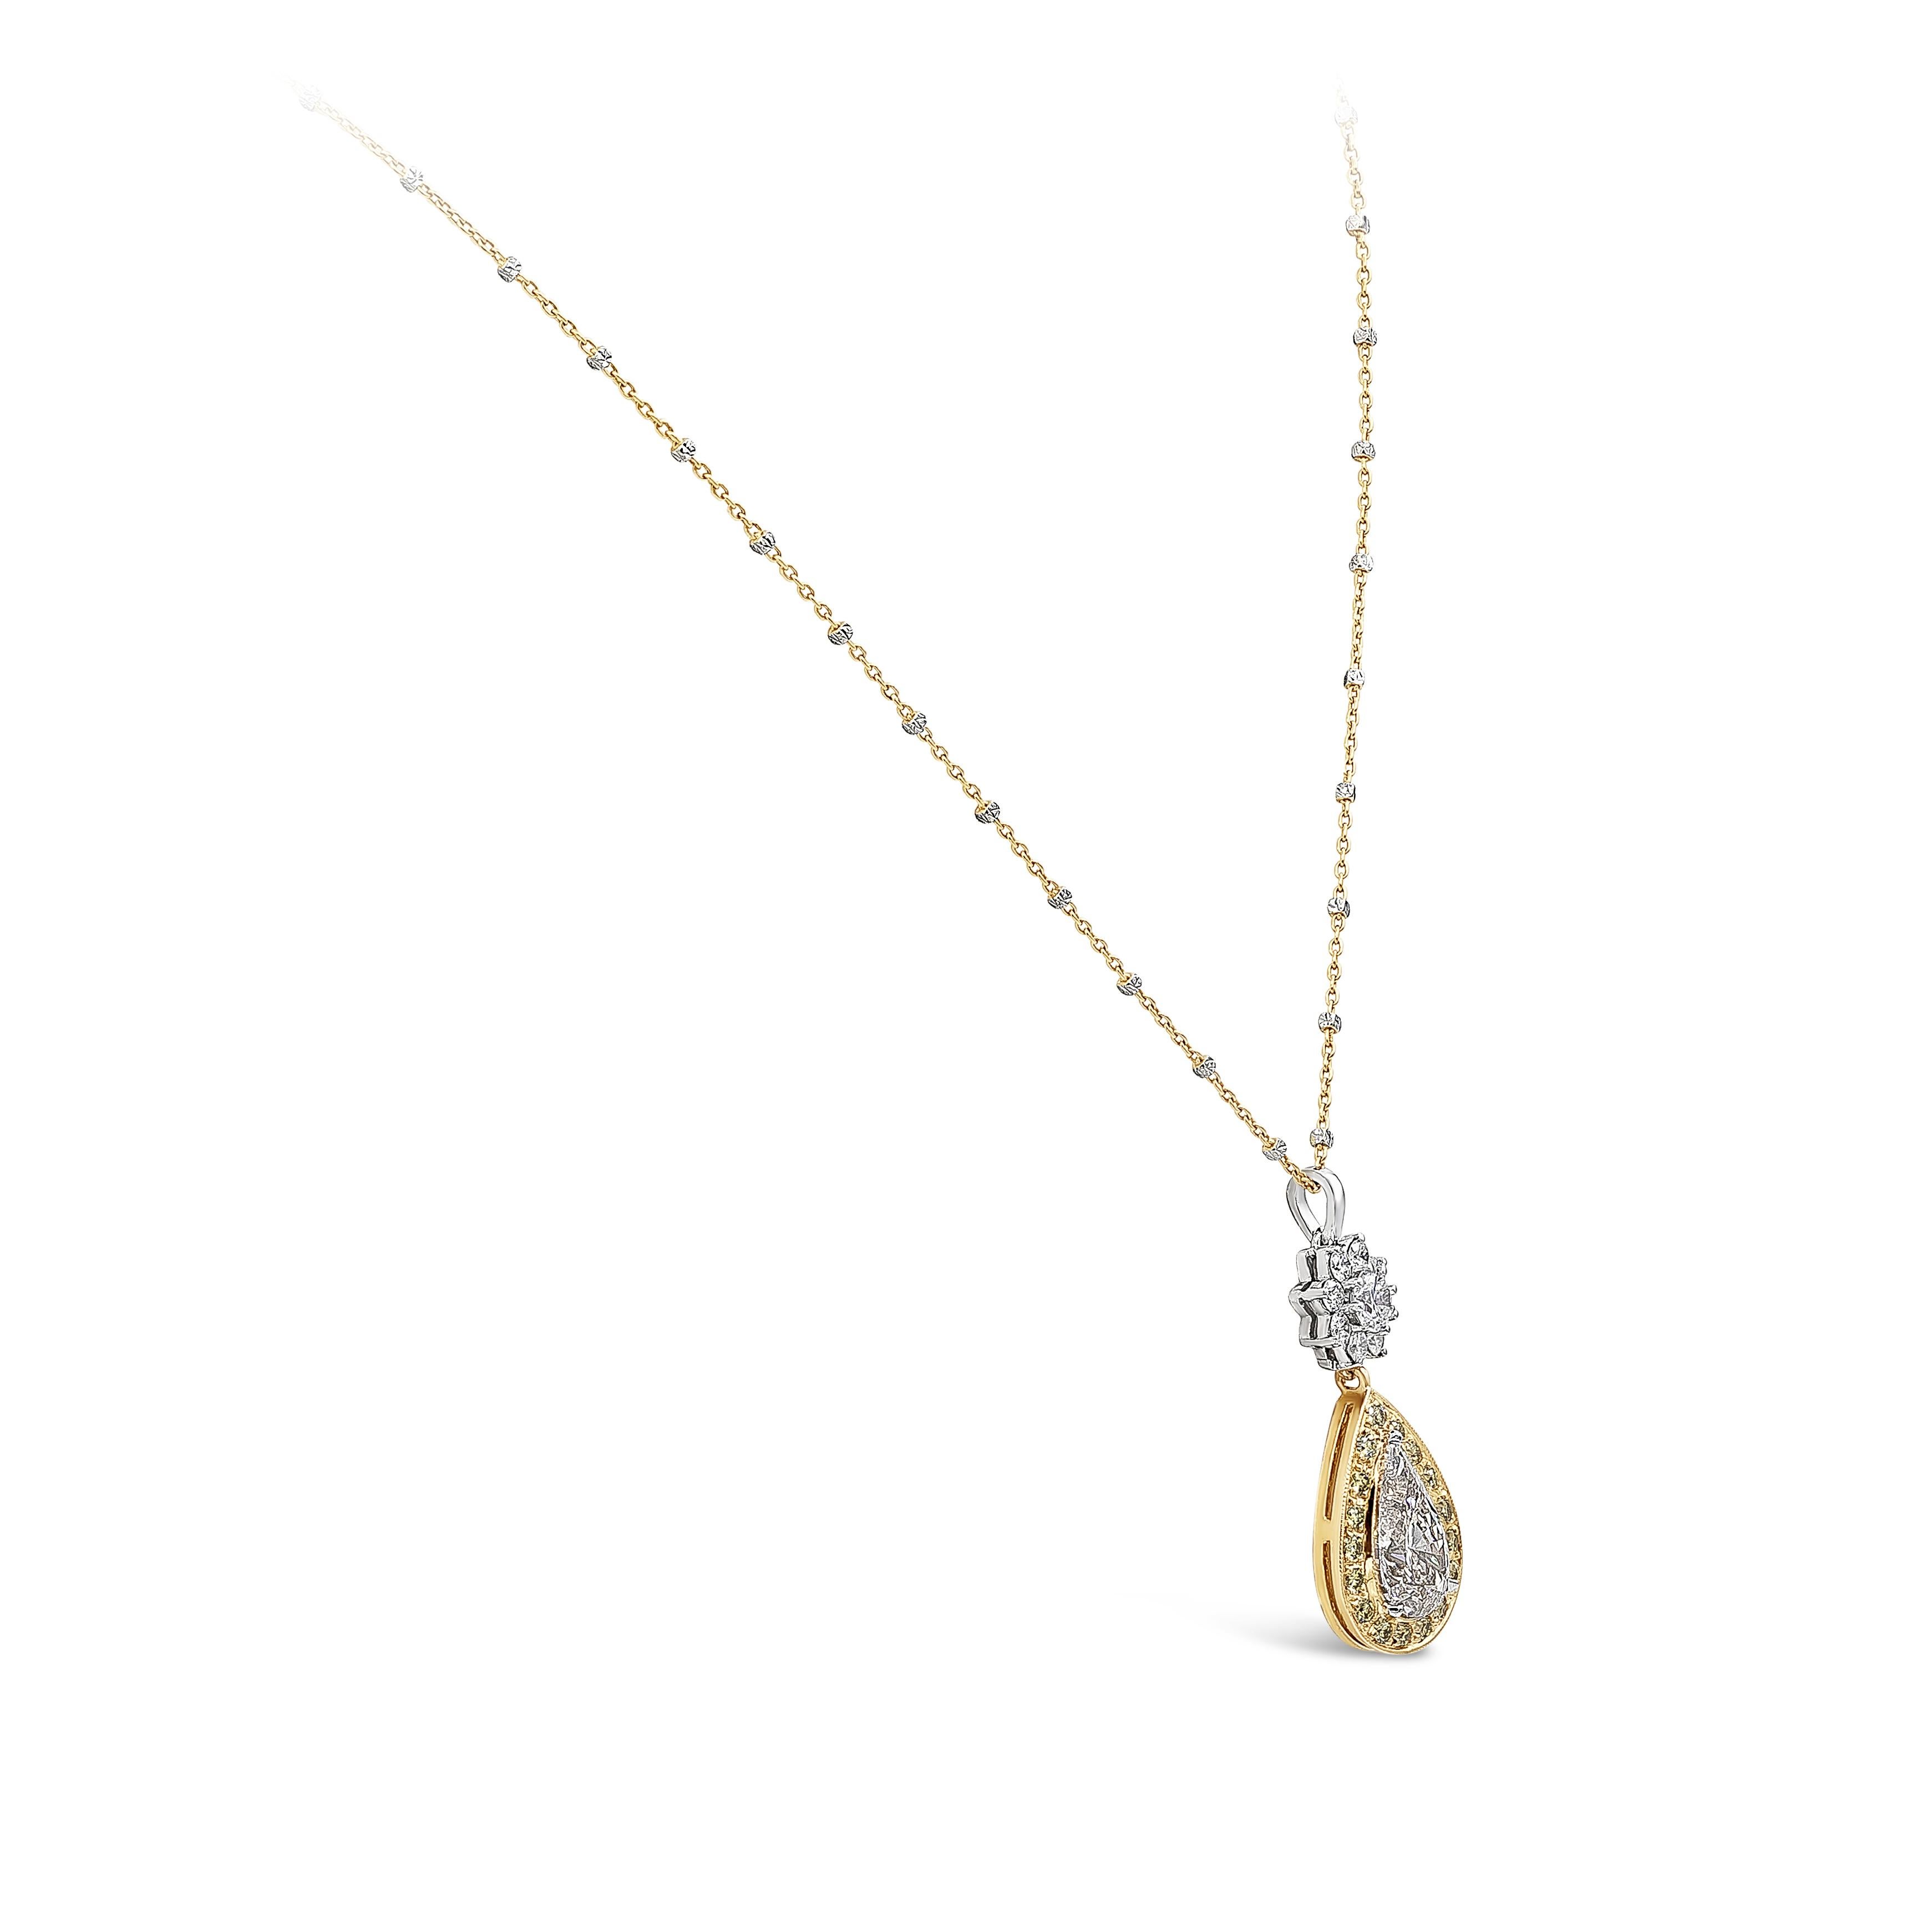 A unique and brilliant pendant necklace showcasing a 3.12 carats pear shape diamond certified by GIA as N (light brown) color, SI2 in clarity. Surrounded by a row of brilliant round yellow diamonds and suspended on a cluster of white brilliant